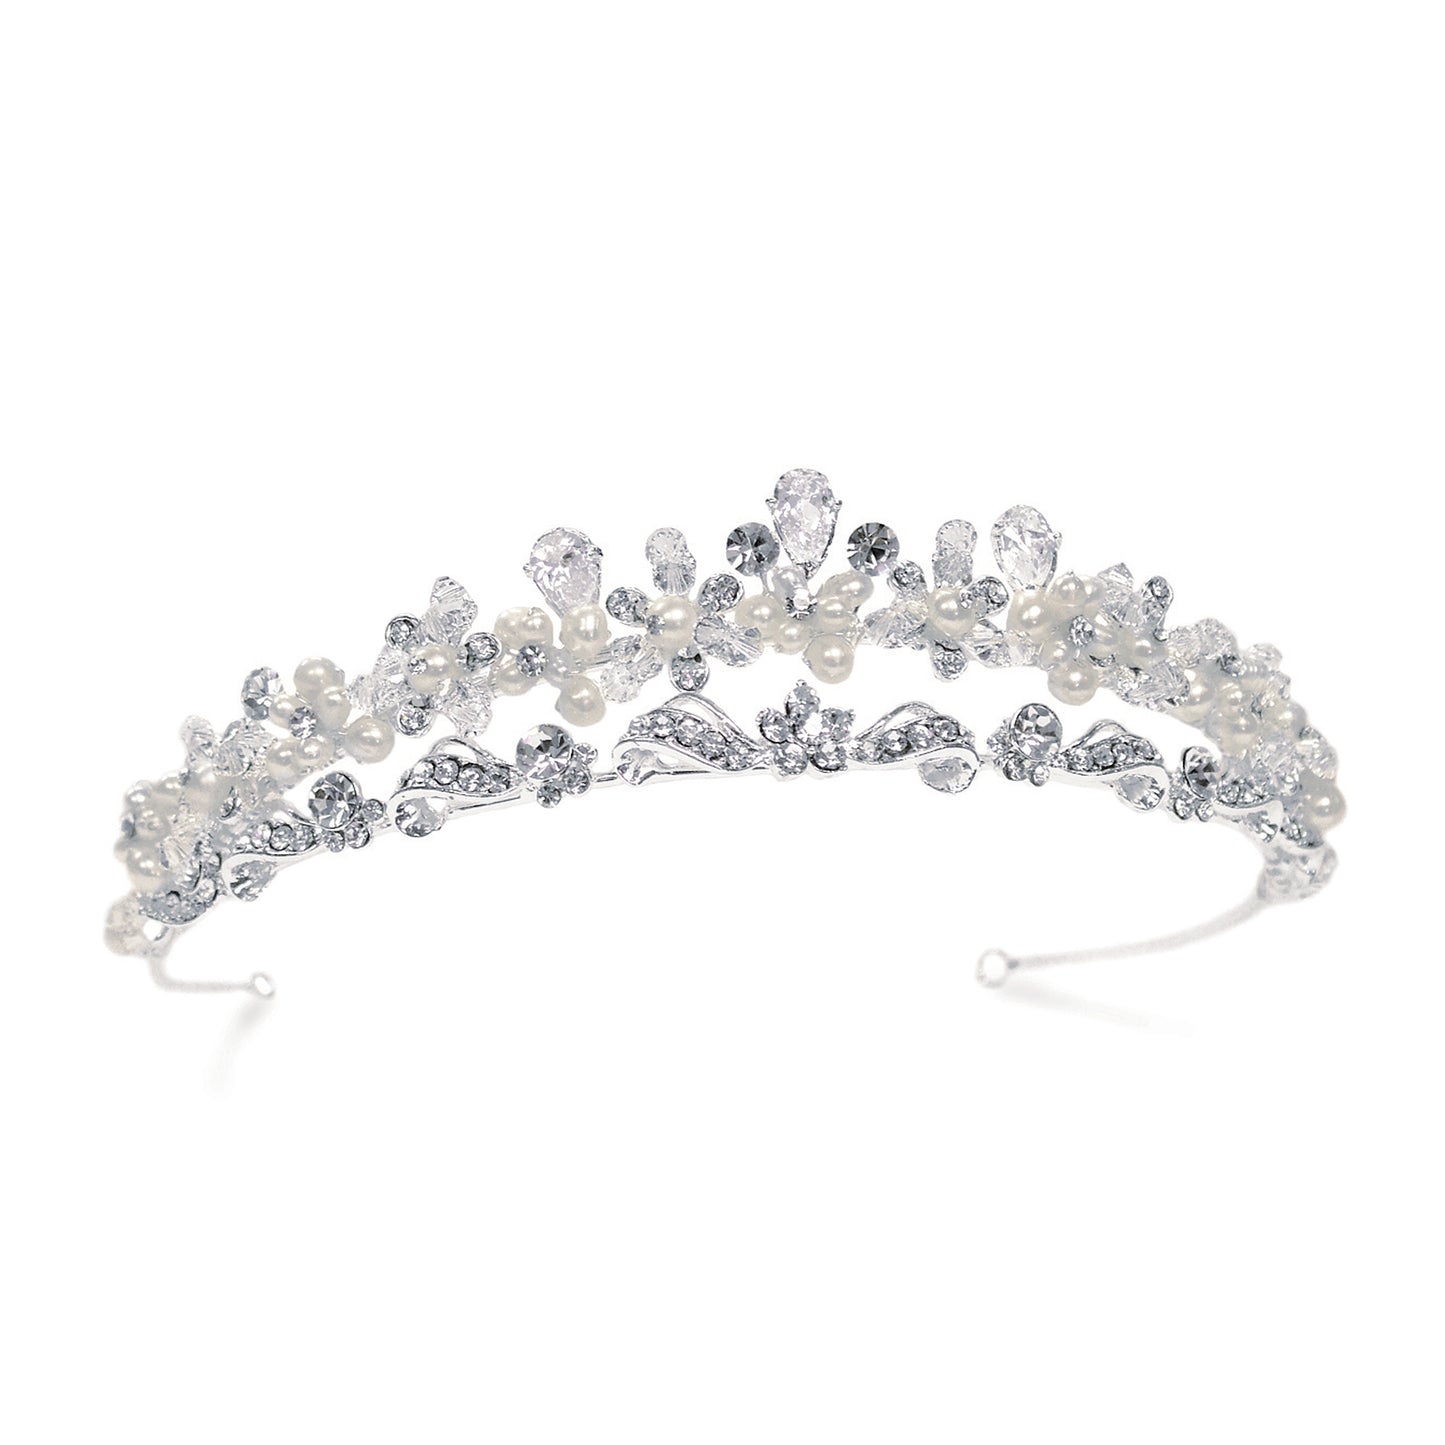 Sarah - Silver Crystal and Pearl Antique Style Tiara